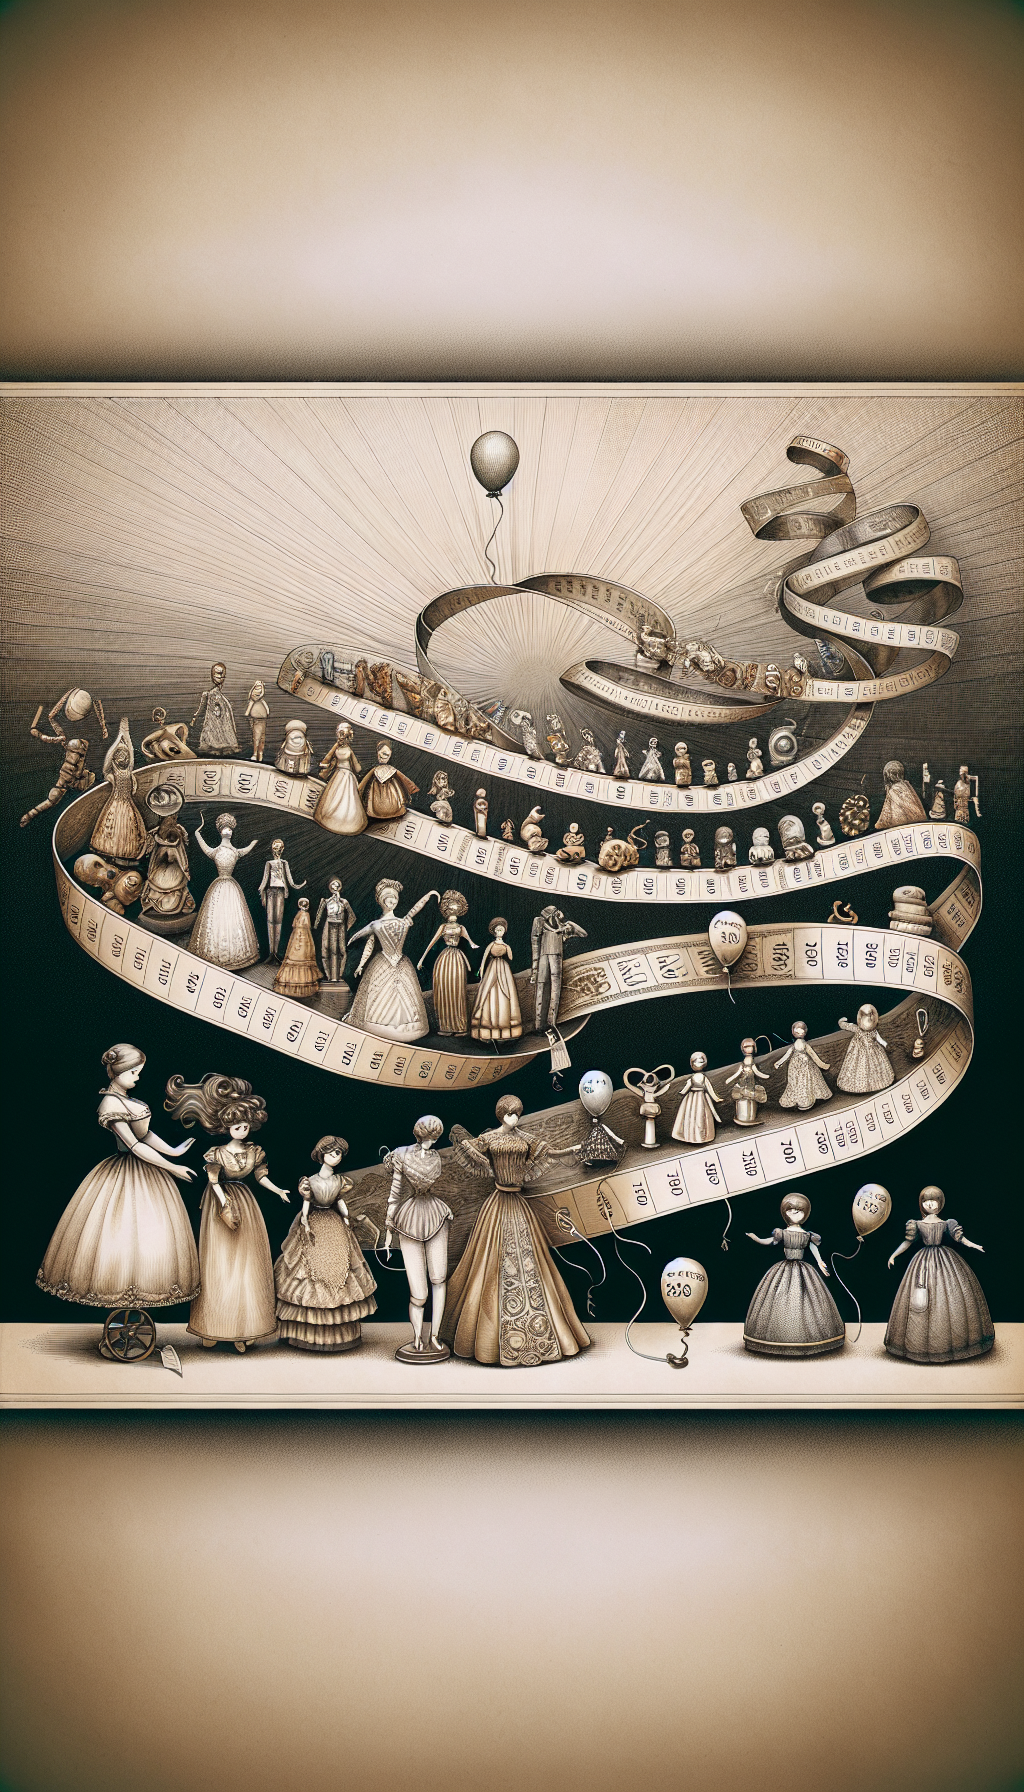 An illustration depicts a winding timeline ribbon unfurling from a bisque doll's porcelain foot to a composition doll's hand, showcasing key dolls of the 1800s-1920s at their production dates with price tags that rise like balloons, symbolizing the increasing value over time. The background transitions from sepia to vibrant colors, reflecting the historical passage and evolving collector's interest.